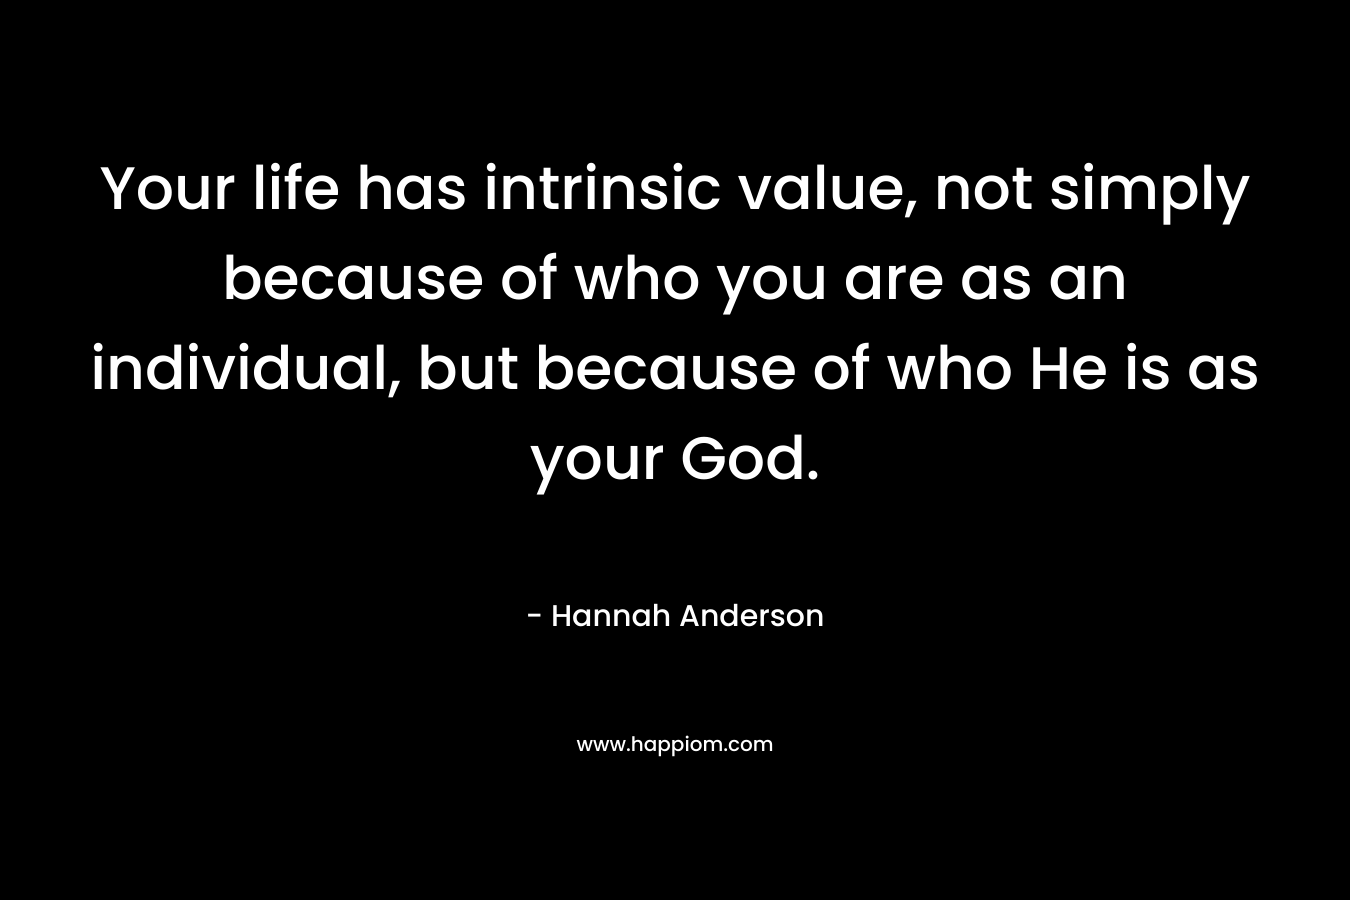 Your life has intrinsic value, not simply because of who you are as an individual, but because of who He is as your God.